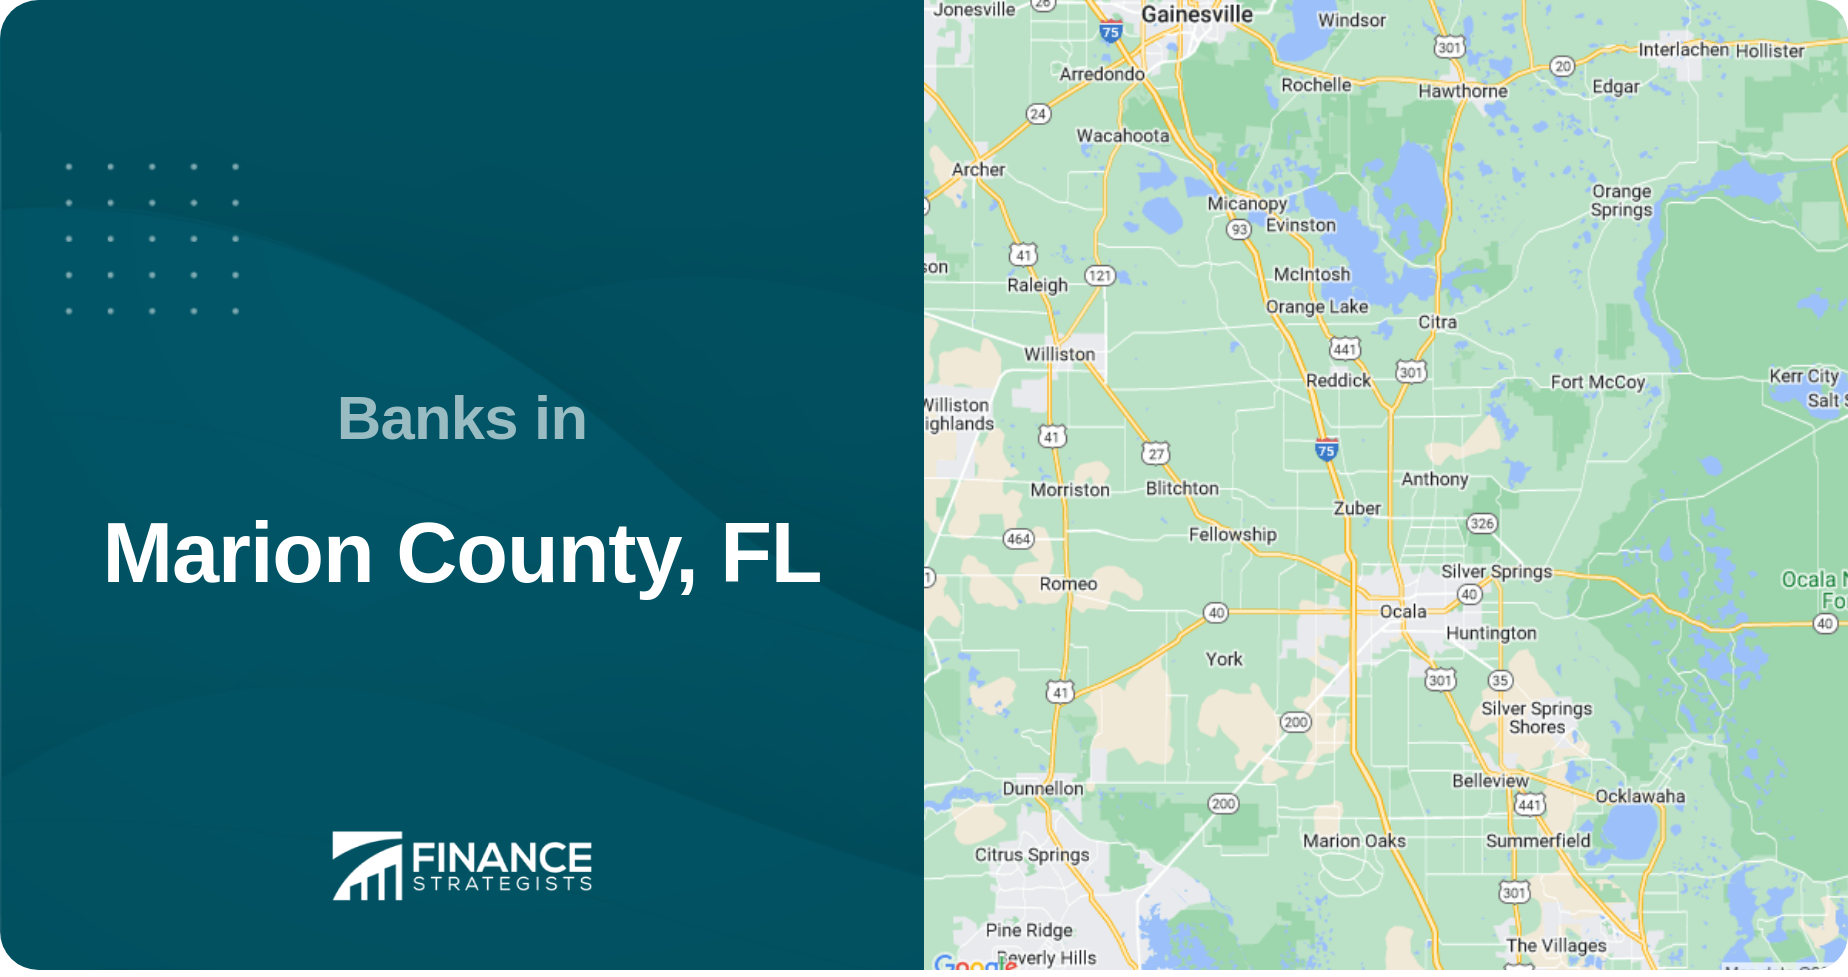 Banks in Marion County, FL